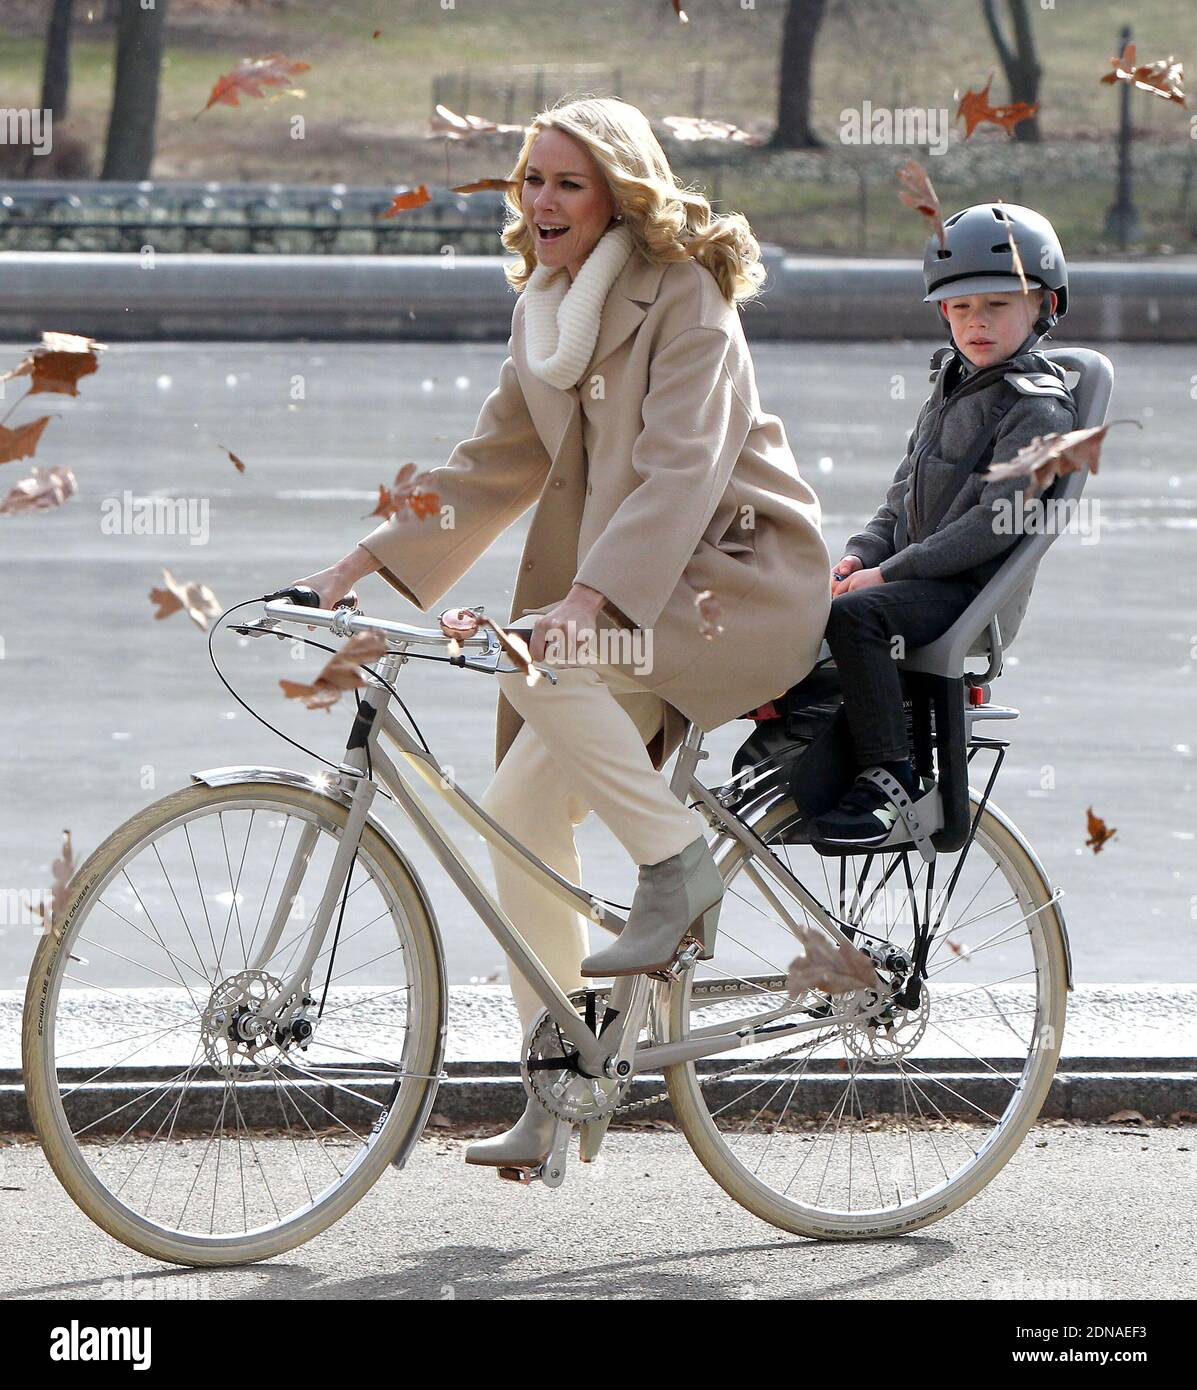 Brisith actress Naomi Watts is doing a photoshoot on a bike for L'Oreal  Paris around The Conservatory Water in Central Park, New York City, NY, USA  on January 21, 2015. Photo by